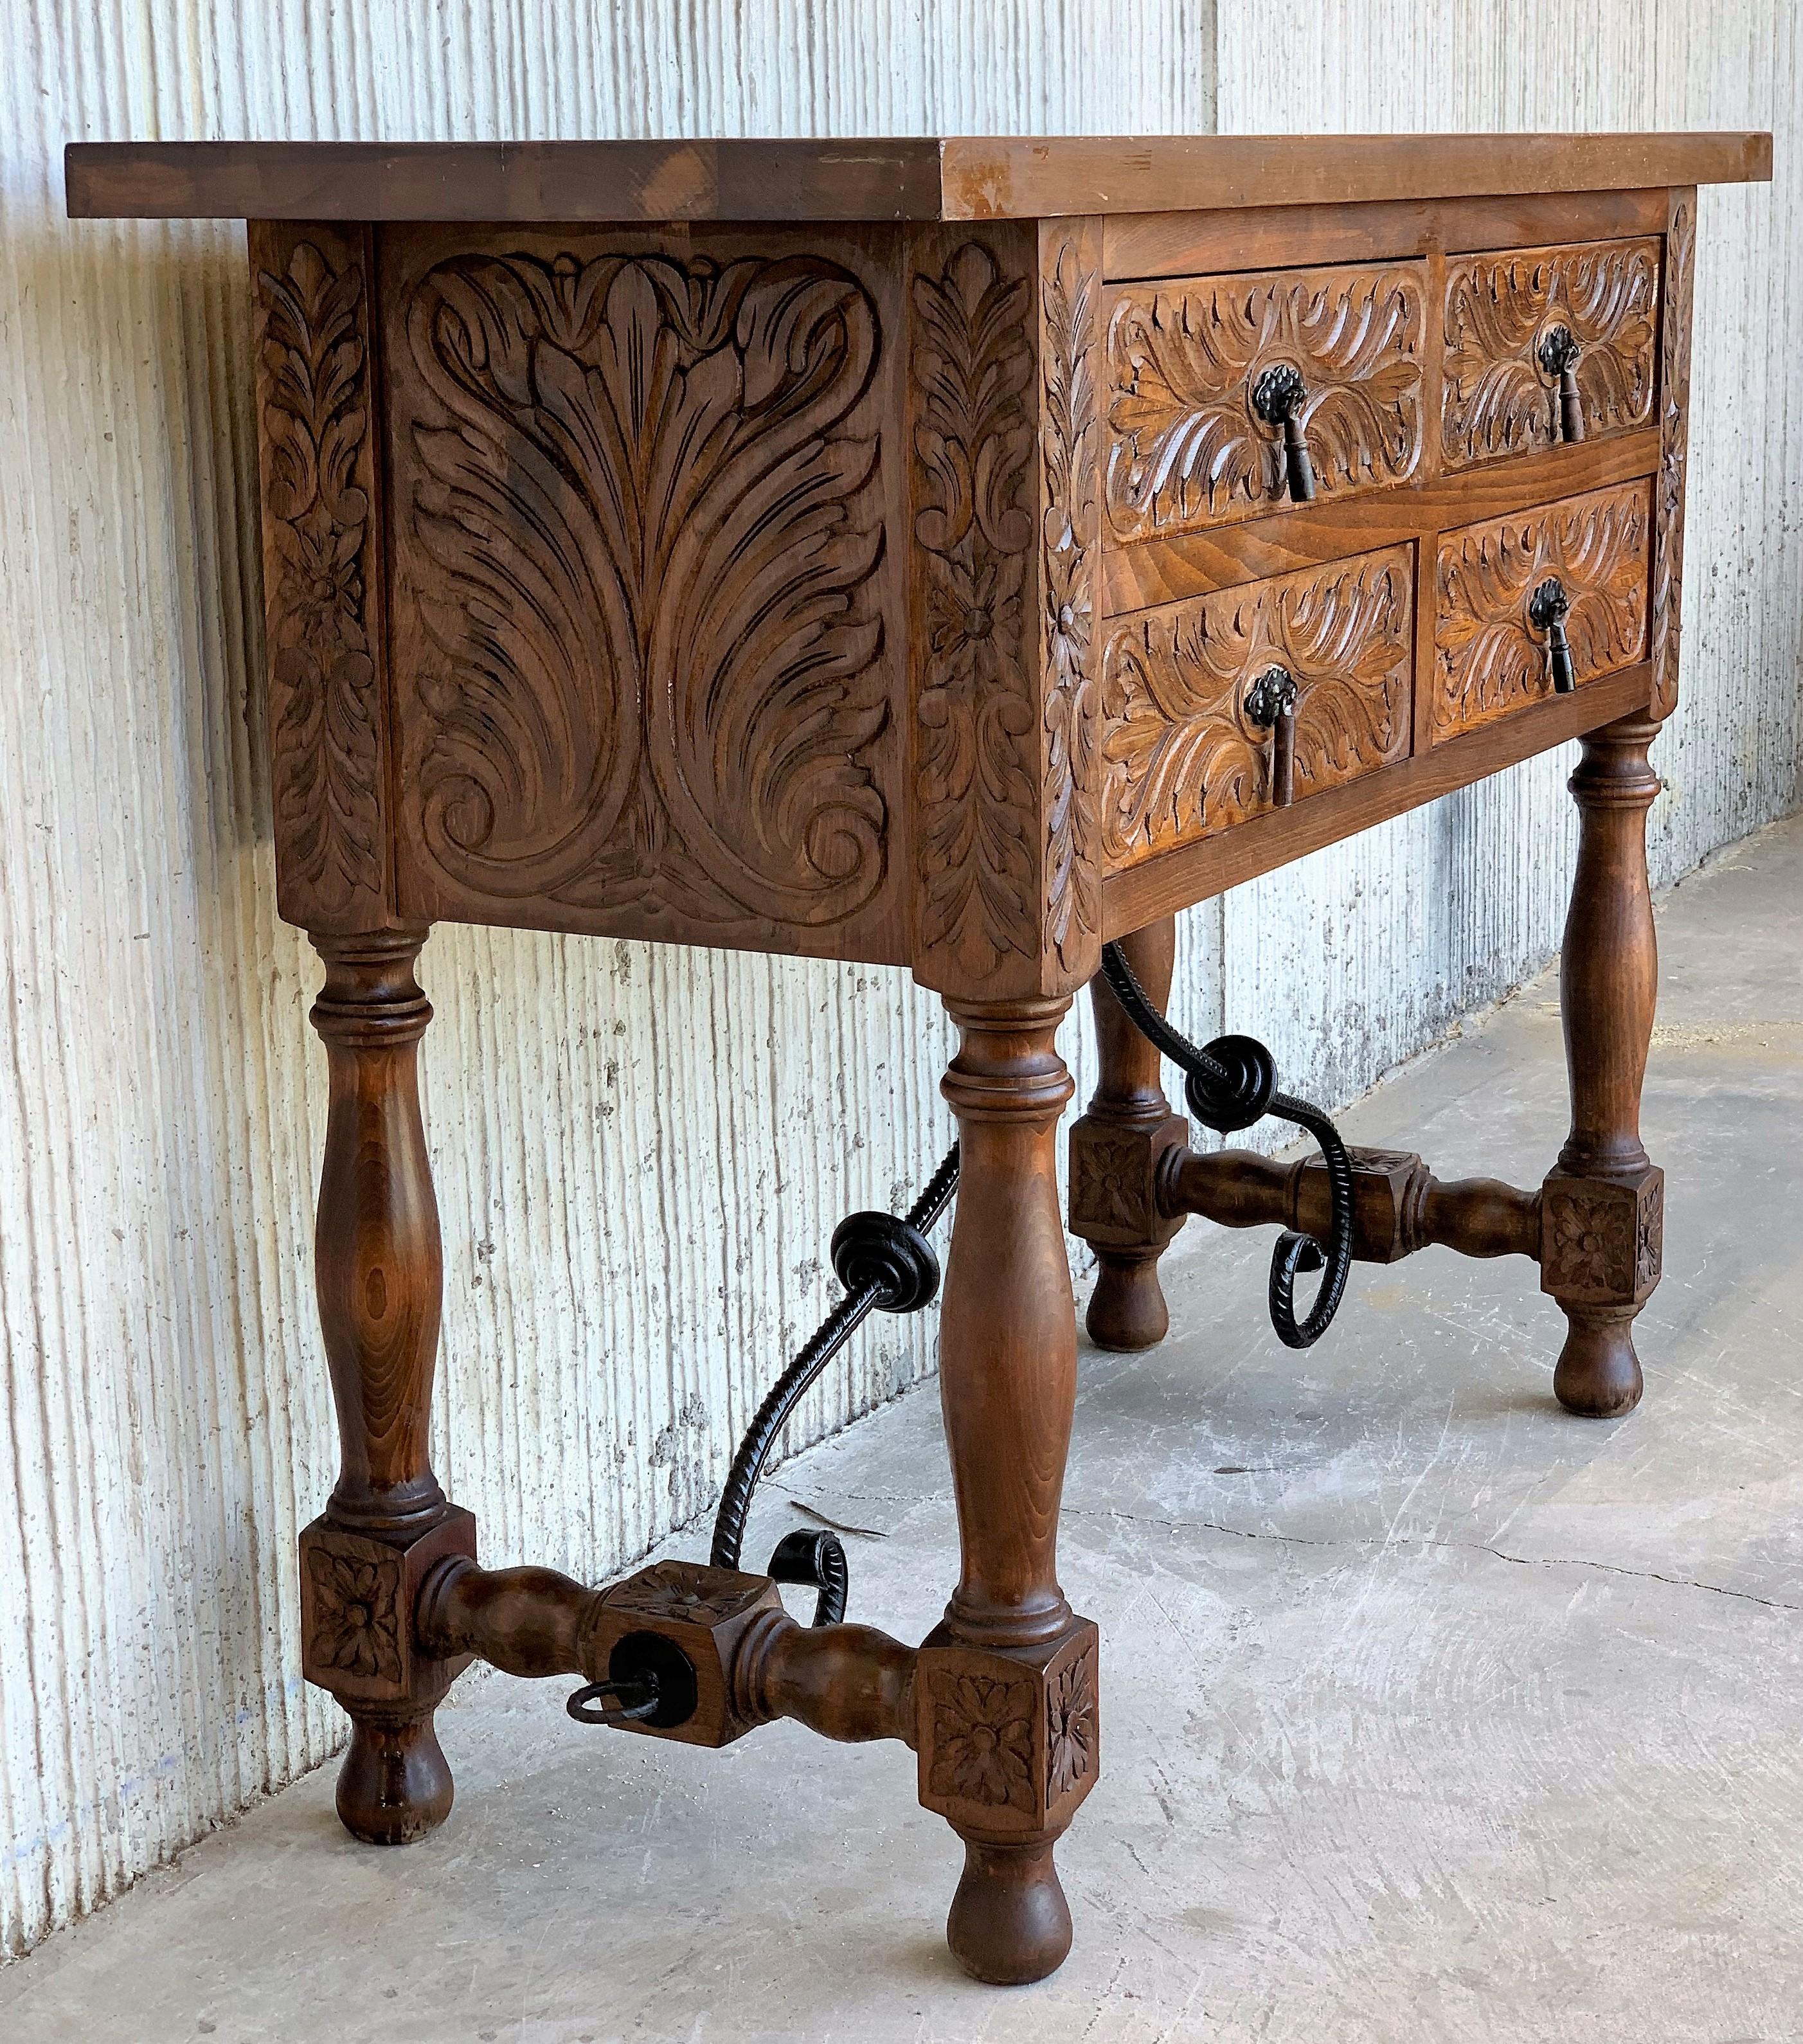 20th Century Catalan Spanish Carved Walnut Console Sofa Table, Four Drawers & Iron Stretcher